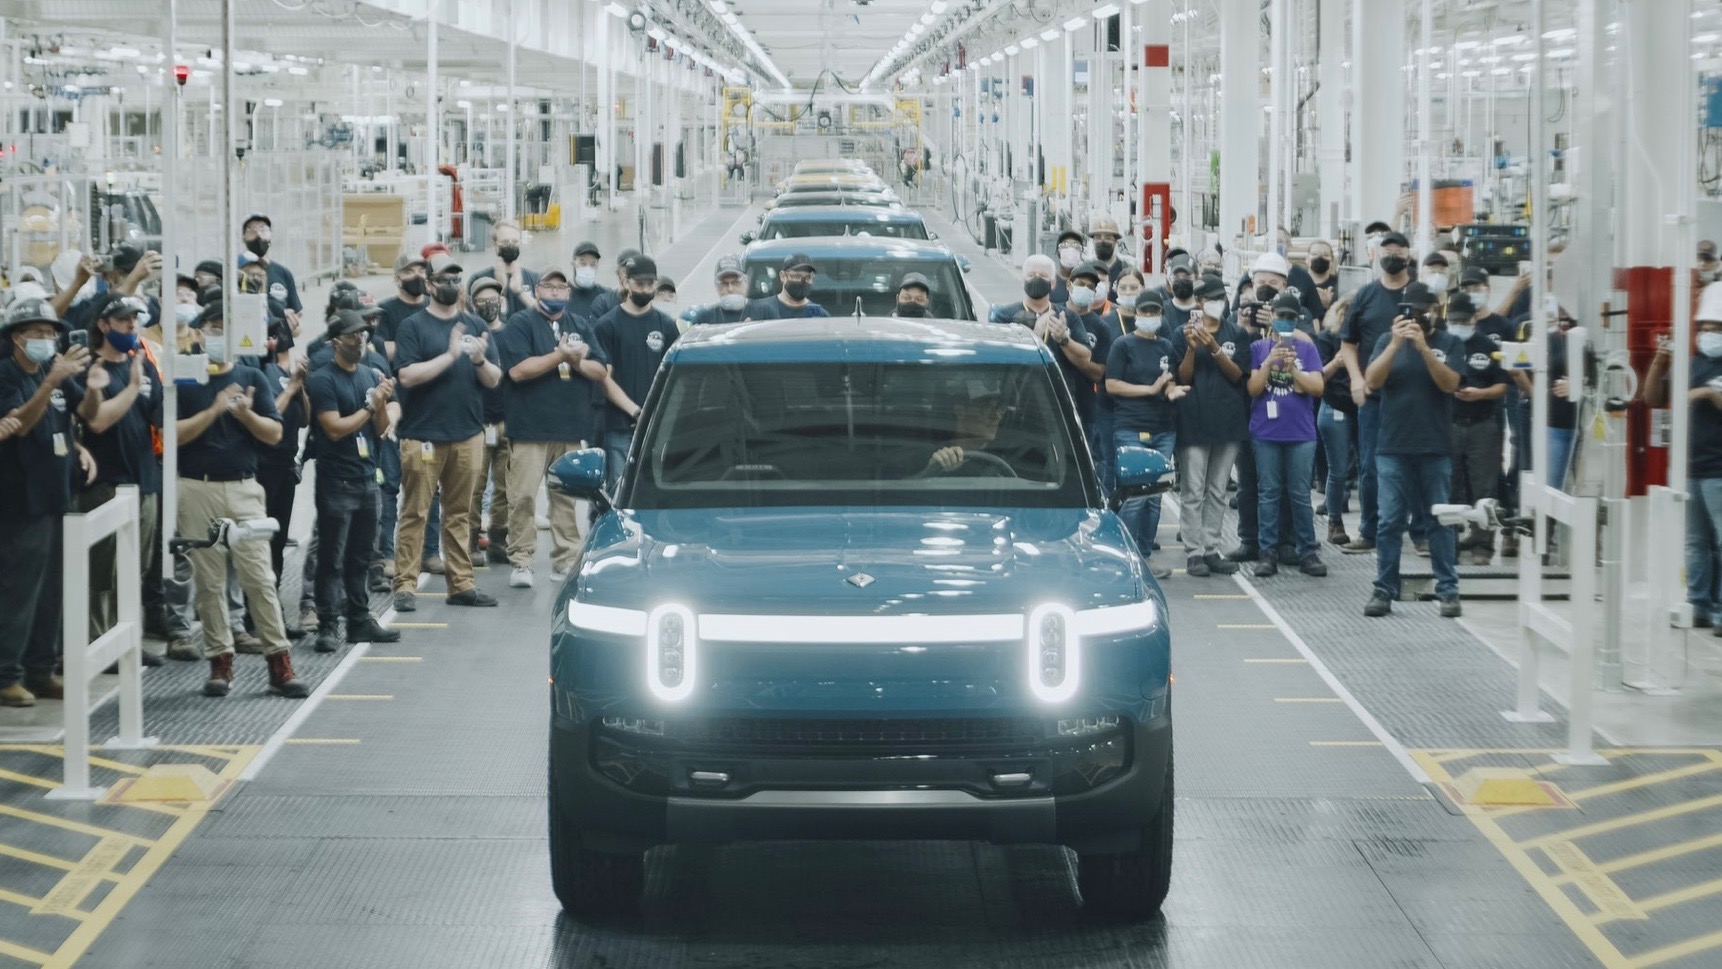 Rivian is making R1T electric trucks for customers, hasn't detailed first deliveries yetRivian is making R1T electric trucks for customers, hasn't detailed first deliveries yet